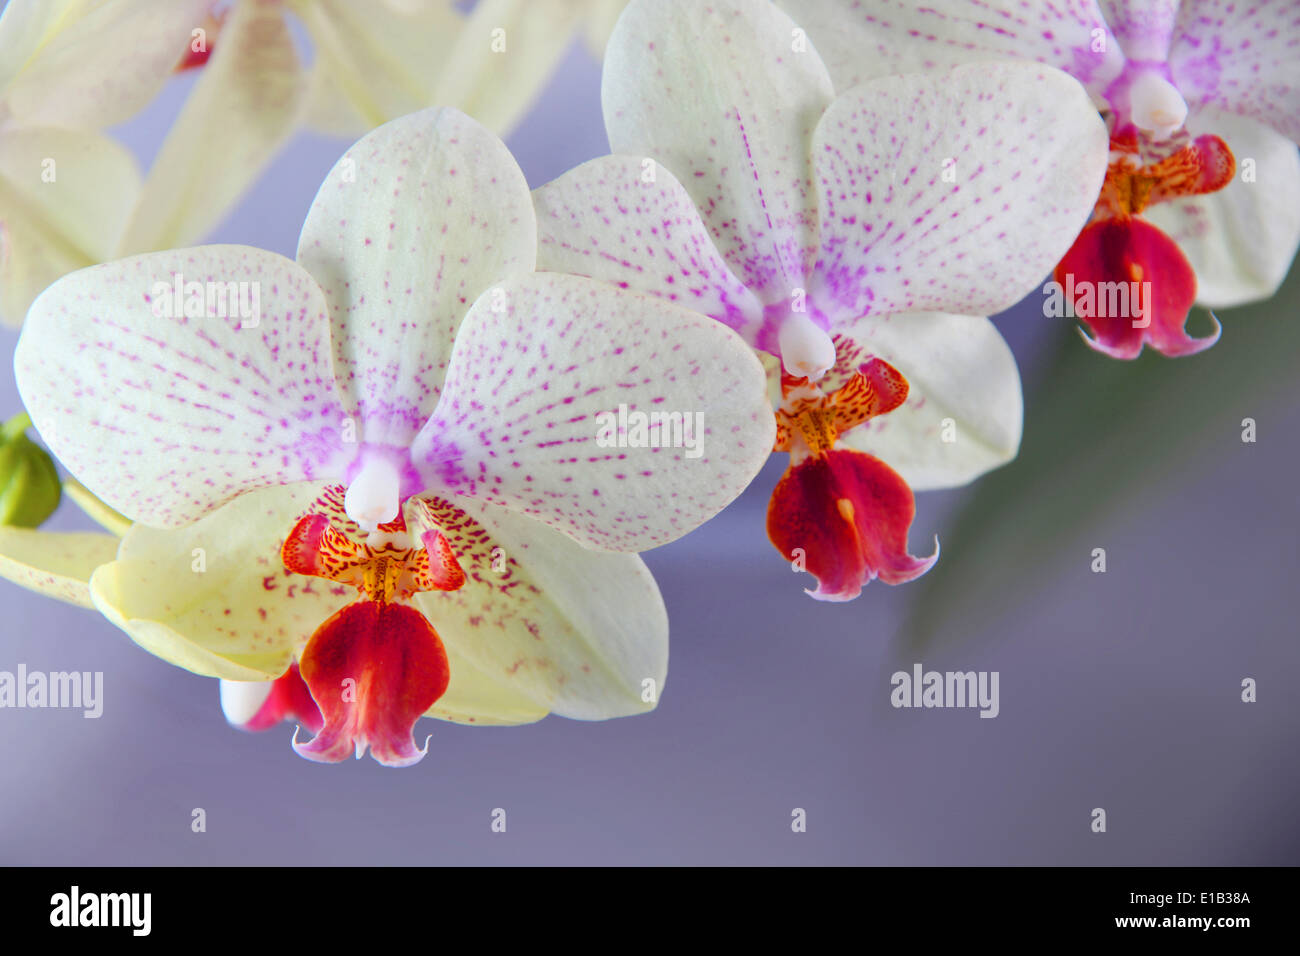 Beautiful orchid or Orchidaceae. Mainly white with a red center & dappled purple markings. Stock Photo